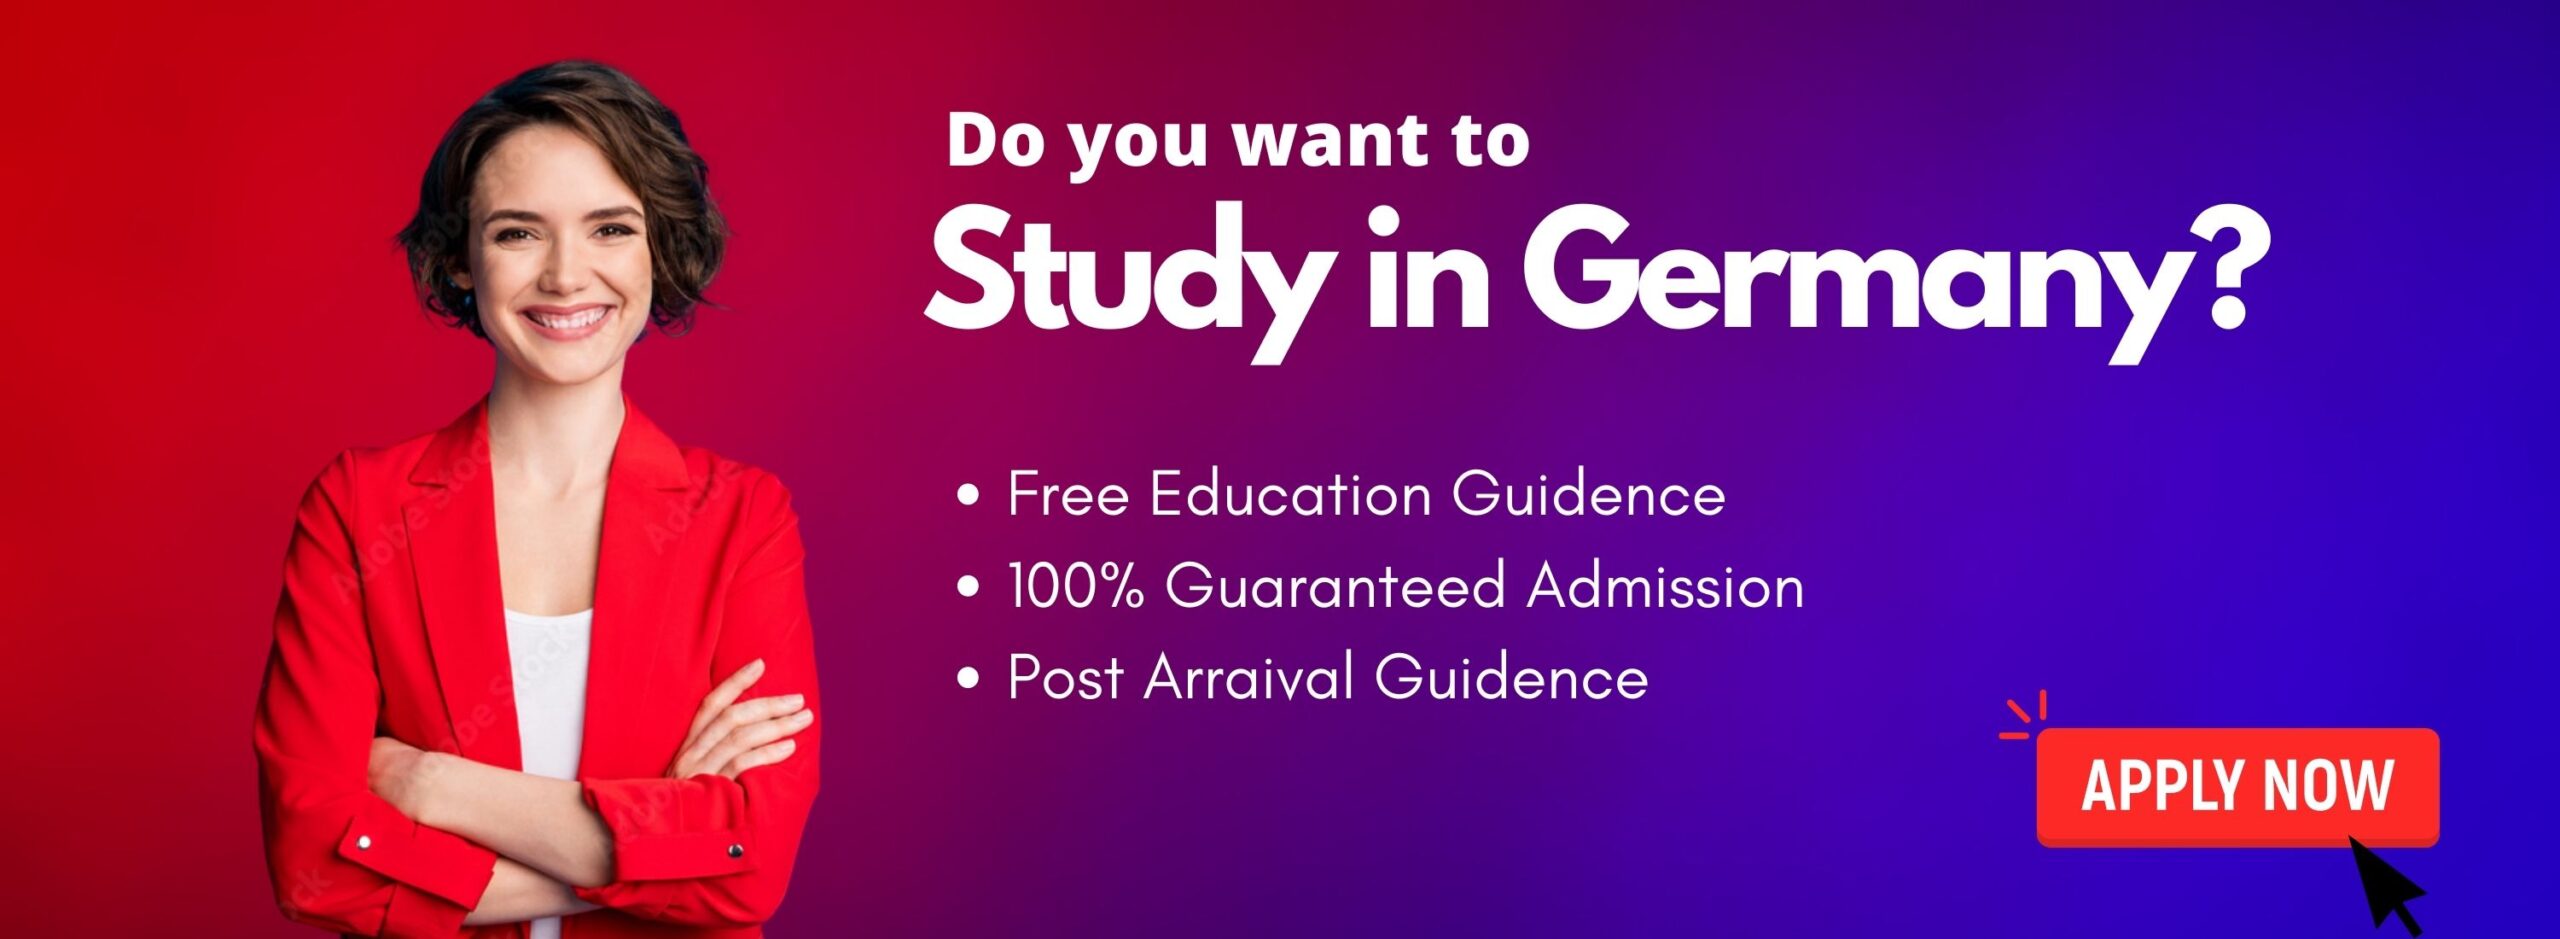 Do you want to study in Germany - KCR CONSULTANTS